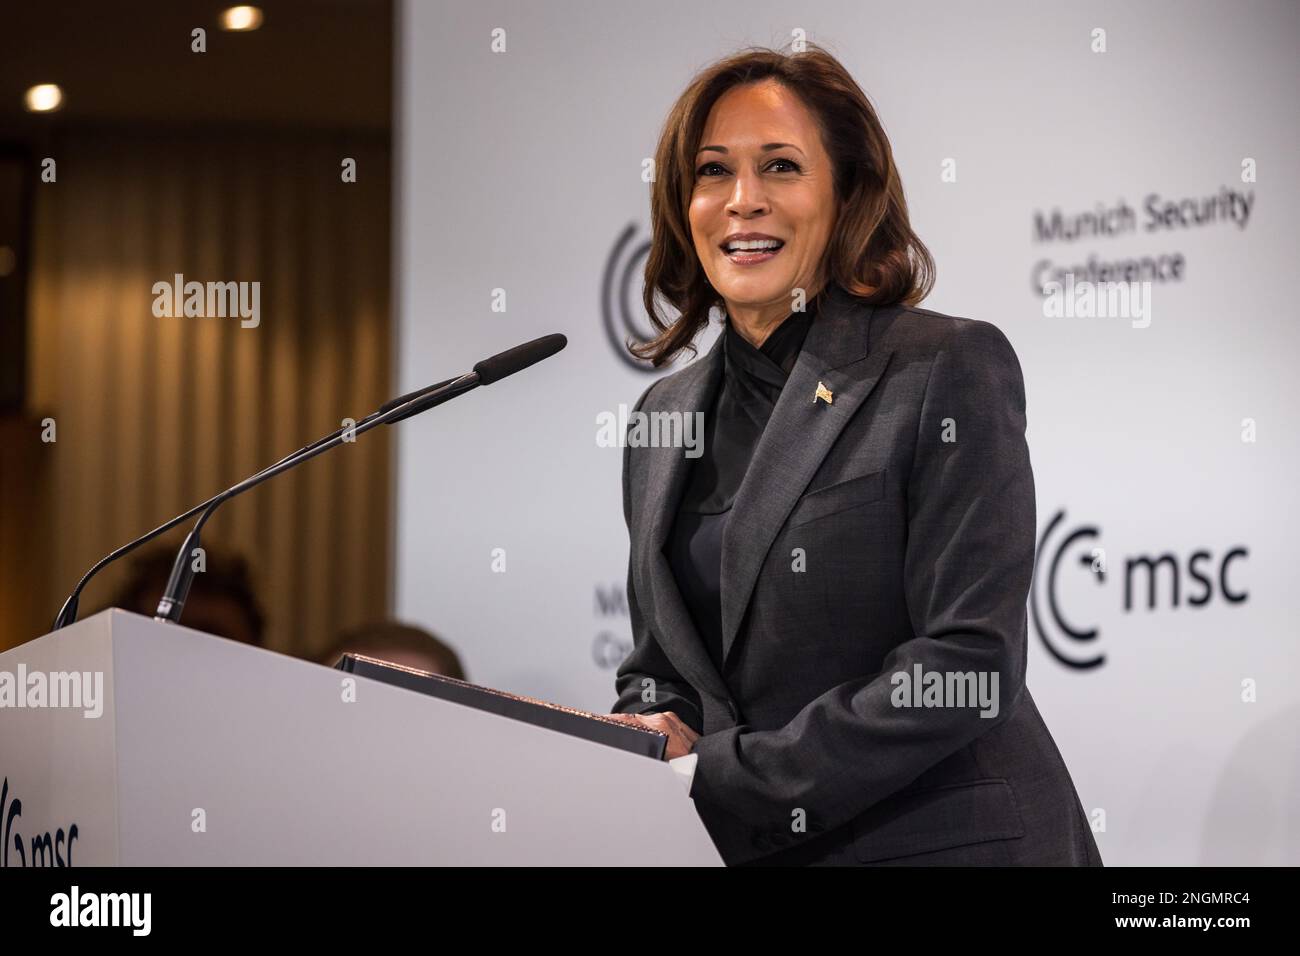 Munich, Germany. 18th Feb, 2023. U.S Vice President Kamala Harris delivers remarks at the Munich Security Conference at the Bayerischer Hof Hotel February 18, 2023 in Munich, Germany. Harris announced that Russia has committed crimes against humanity and said they will be held accountable. Credit: Alexandra Baier/MSC/Alexandra Baier/Alamy Live News Stock Photo